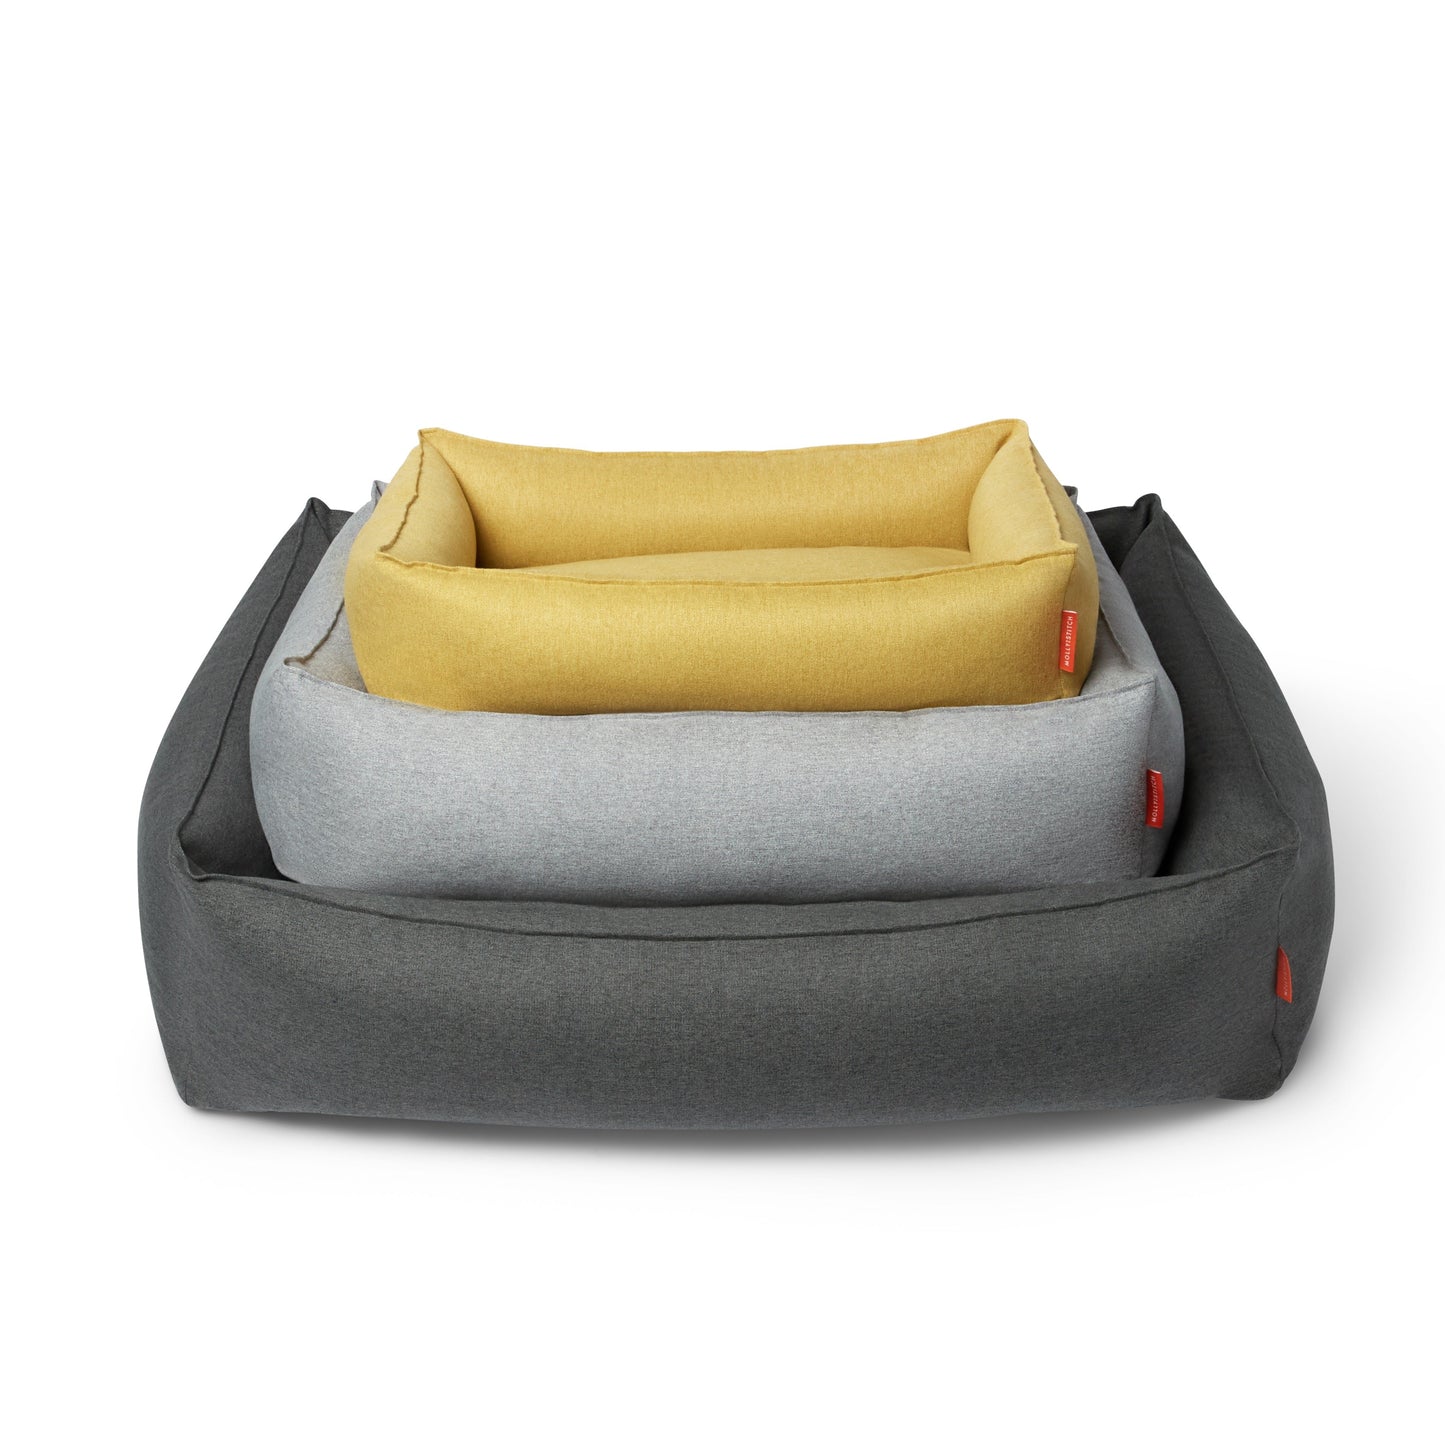 Alpine Dog Bed - Grey by Molly And Stitch US